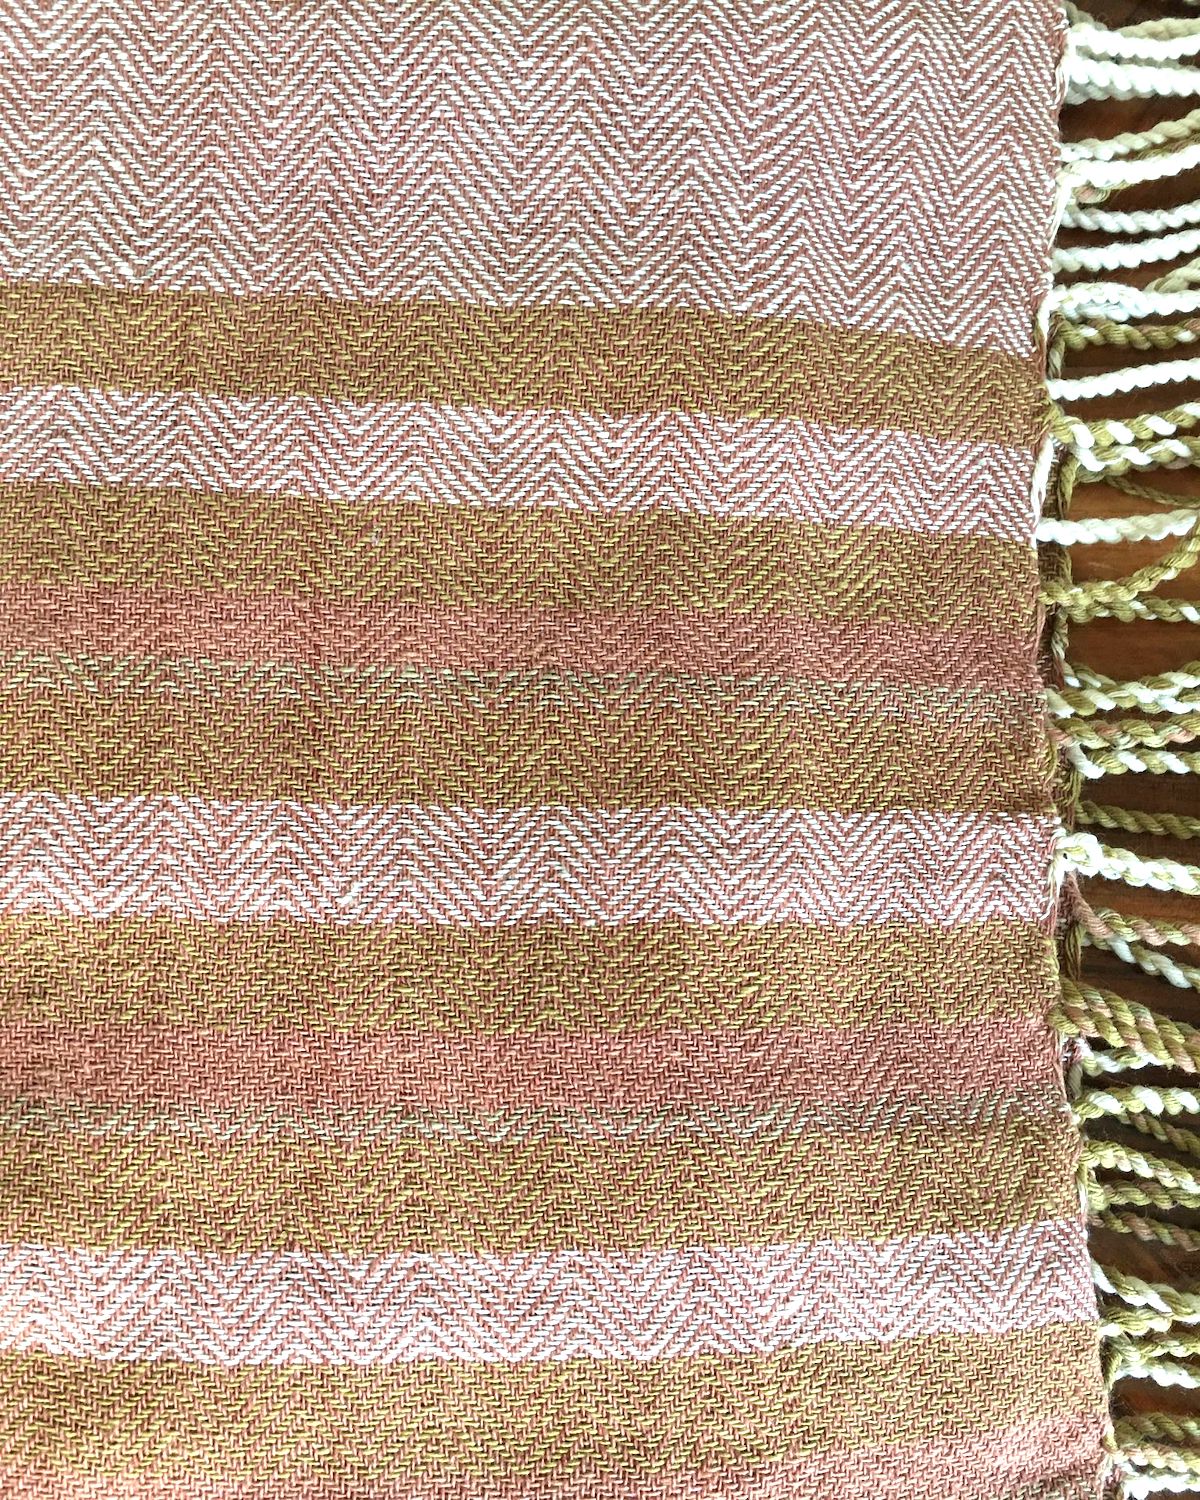 Pure Cotton Scarf in Mauve Stripe with Tassels | Flat Weave | Woven by Hand in Myanmar - YGN Collective